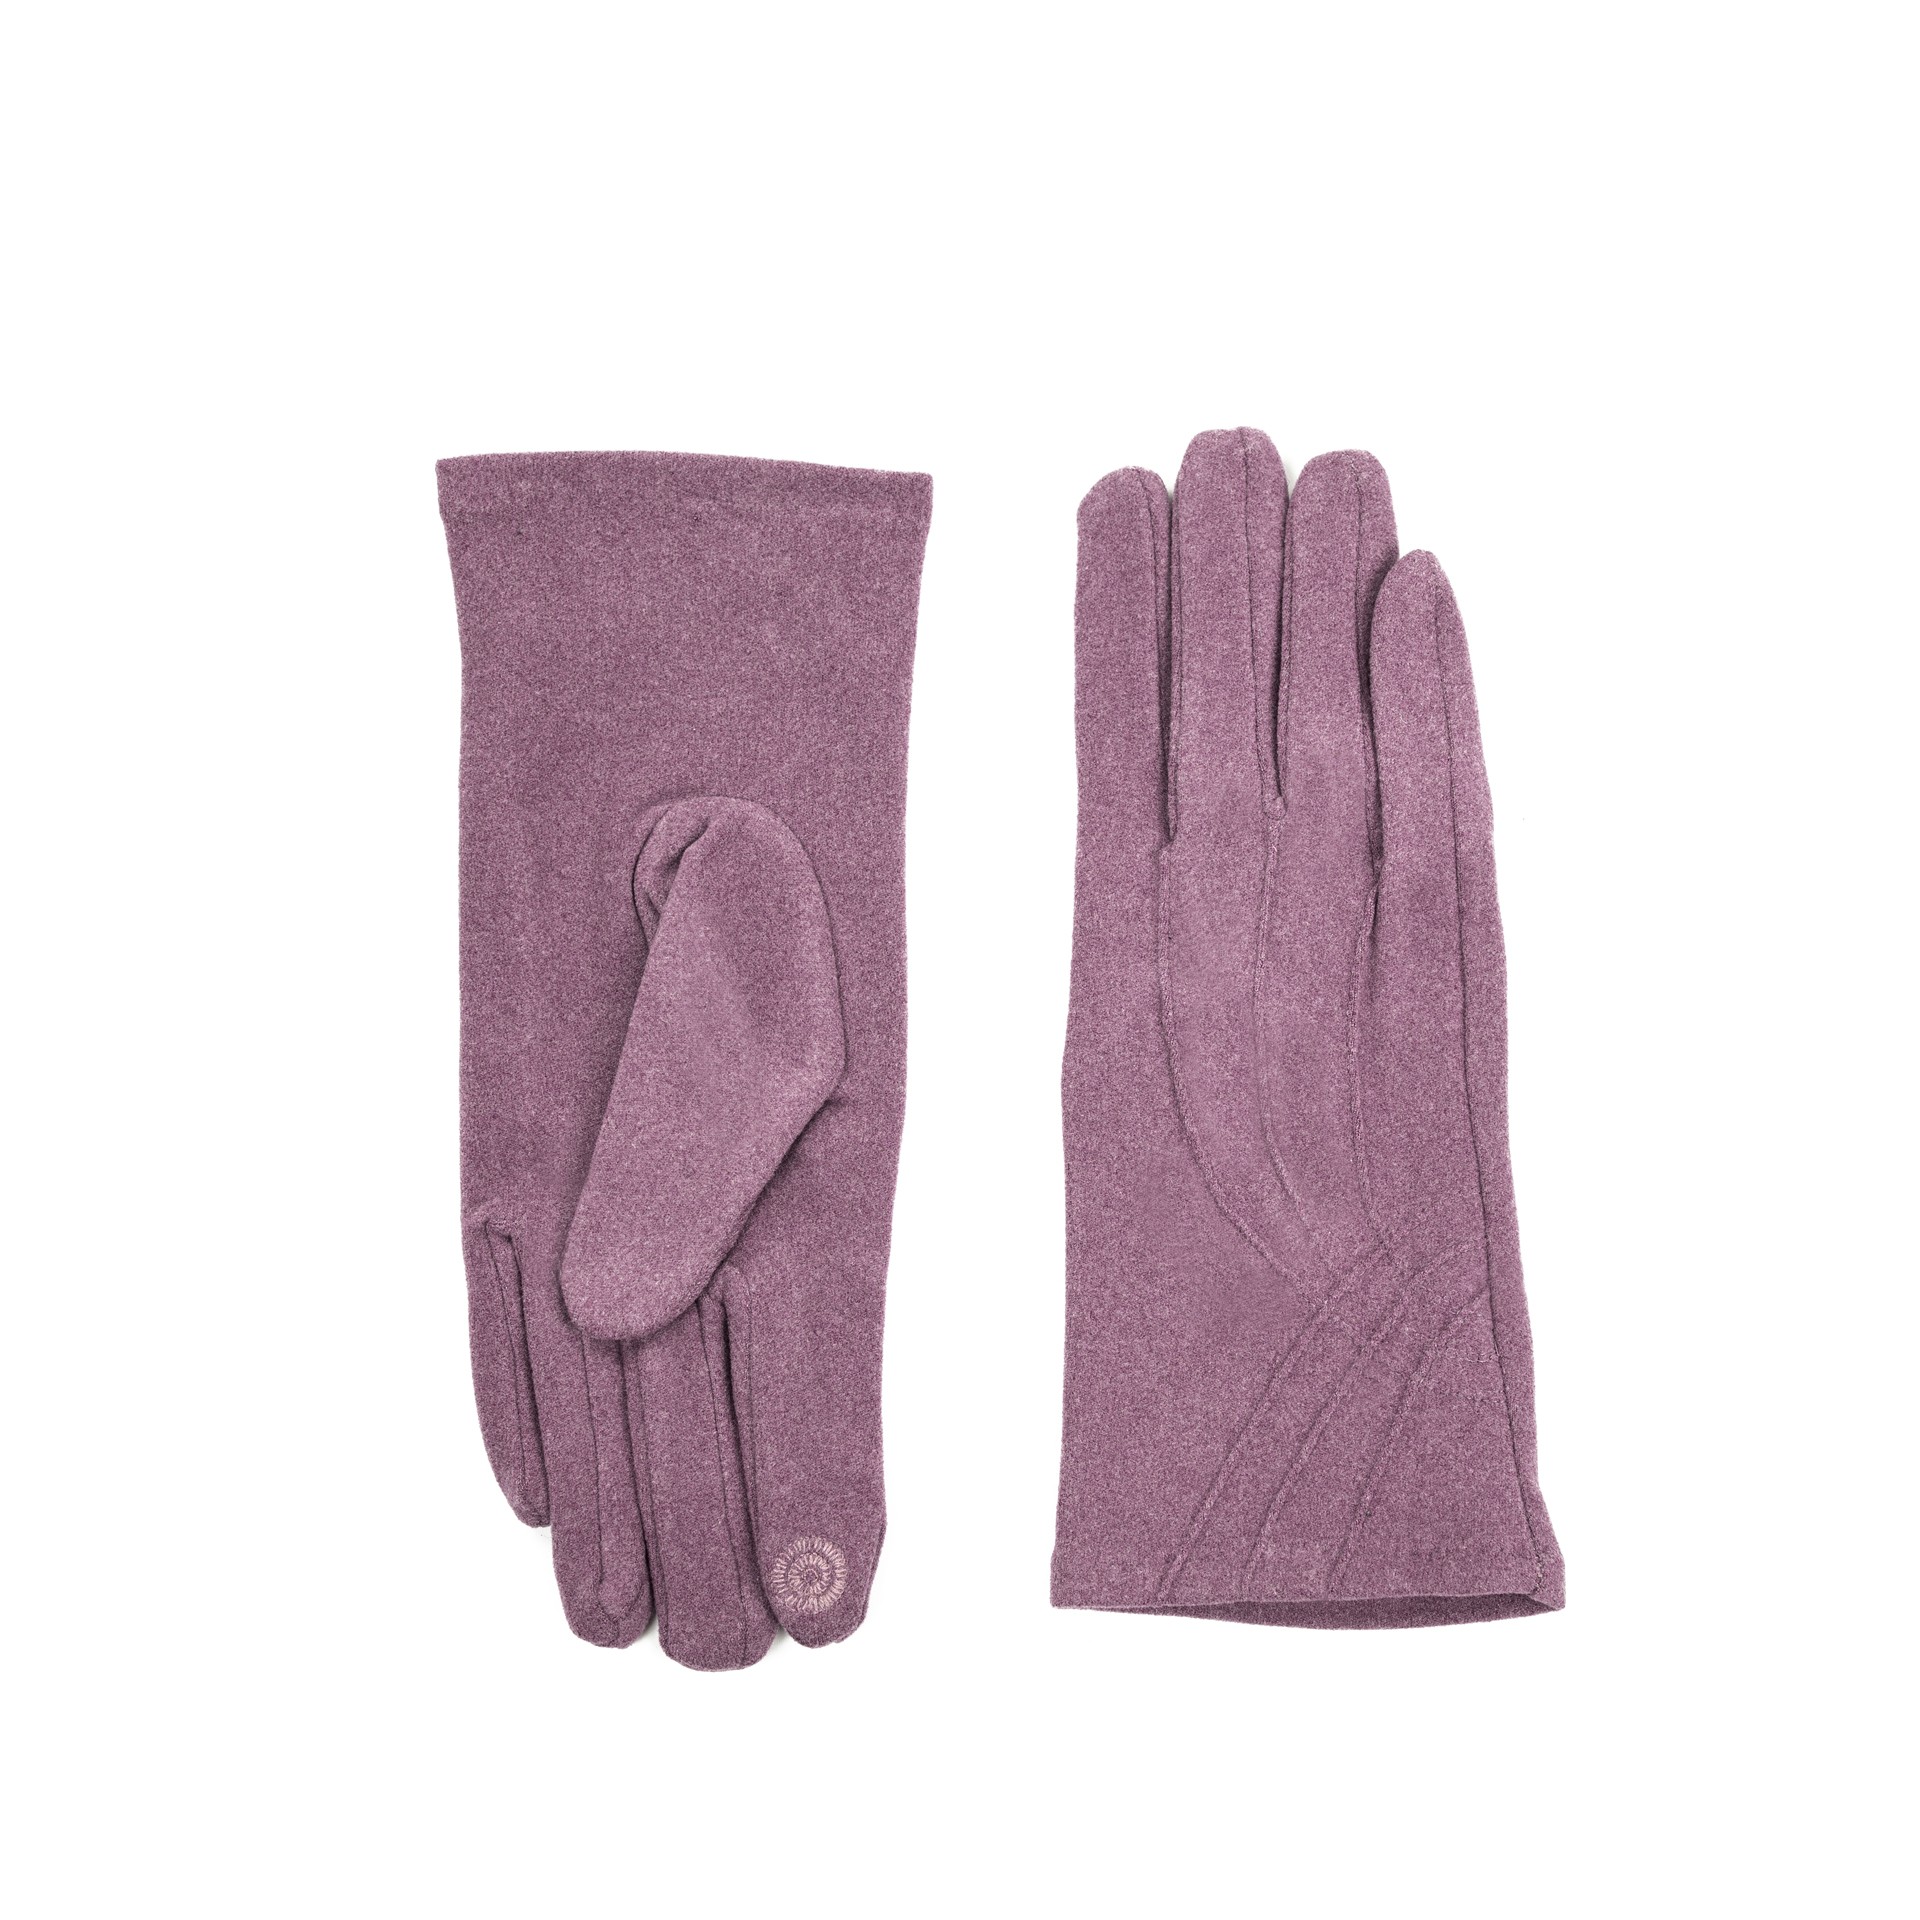 Art Of Polo Woman's Gloves rk23314-3